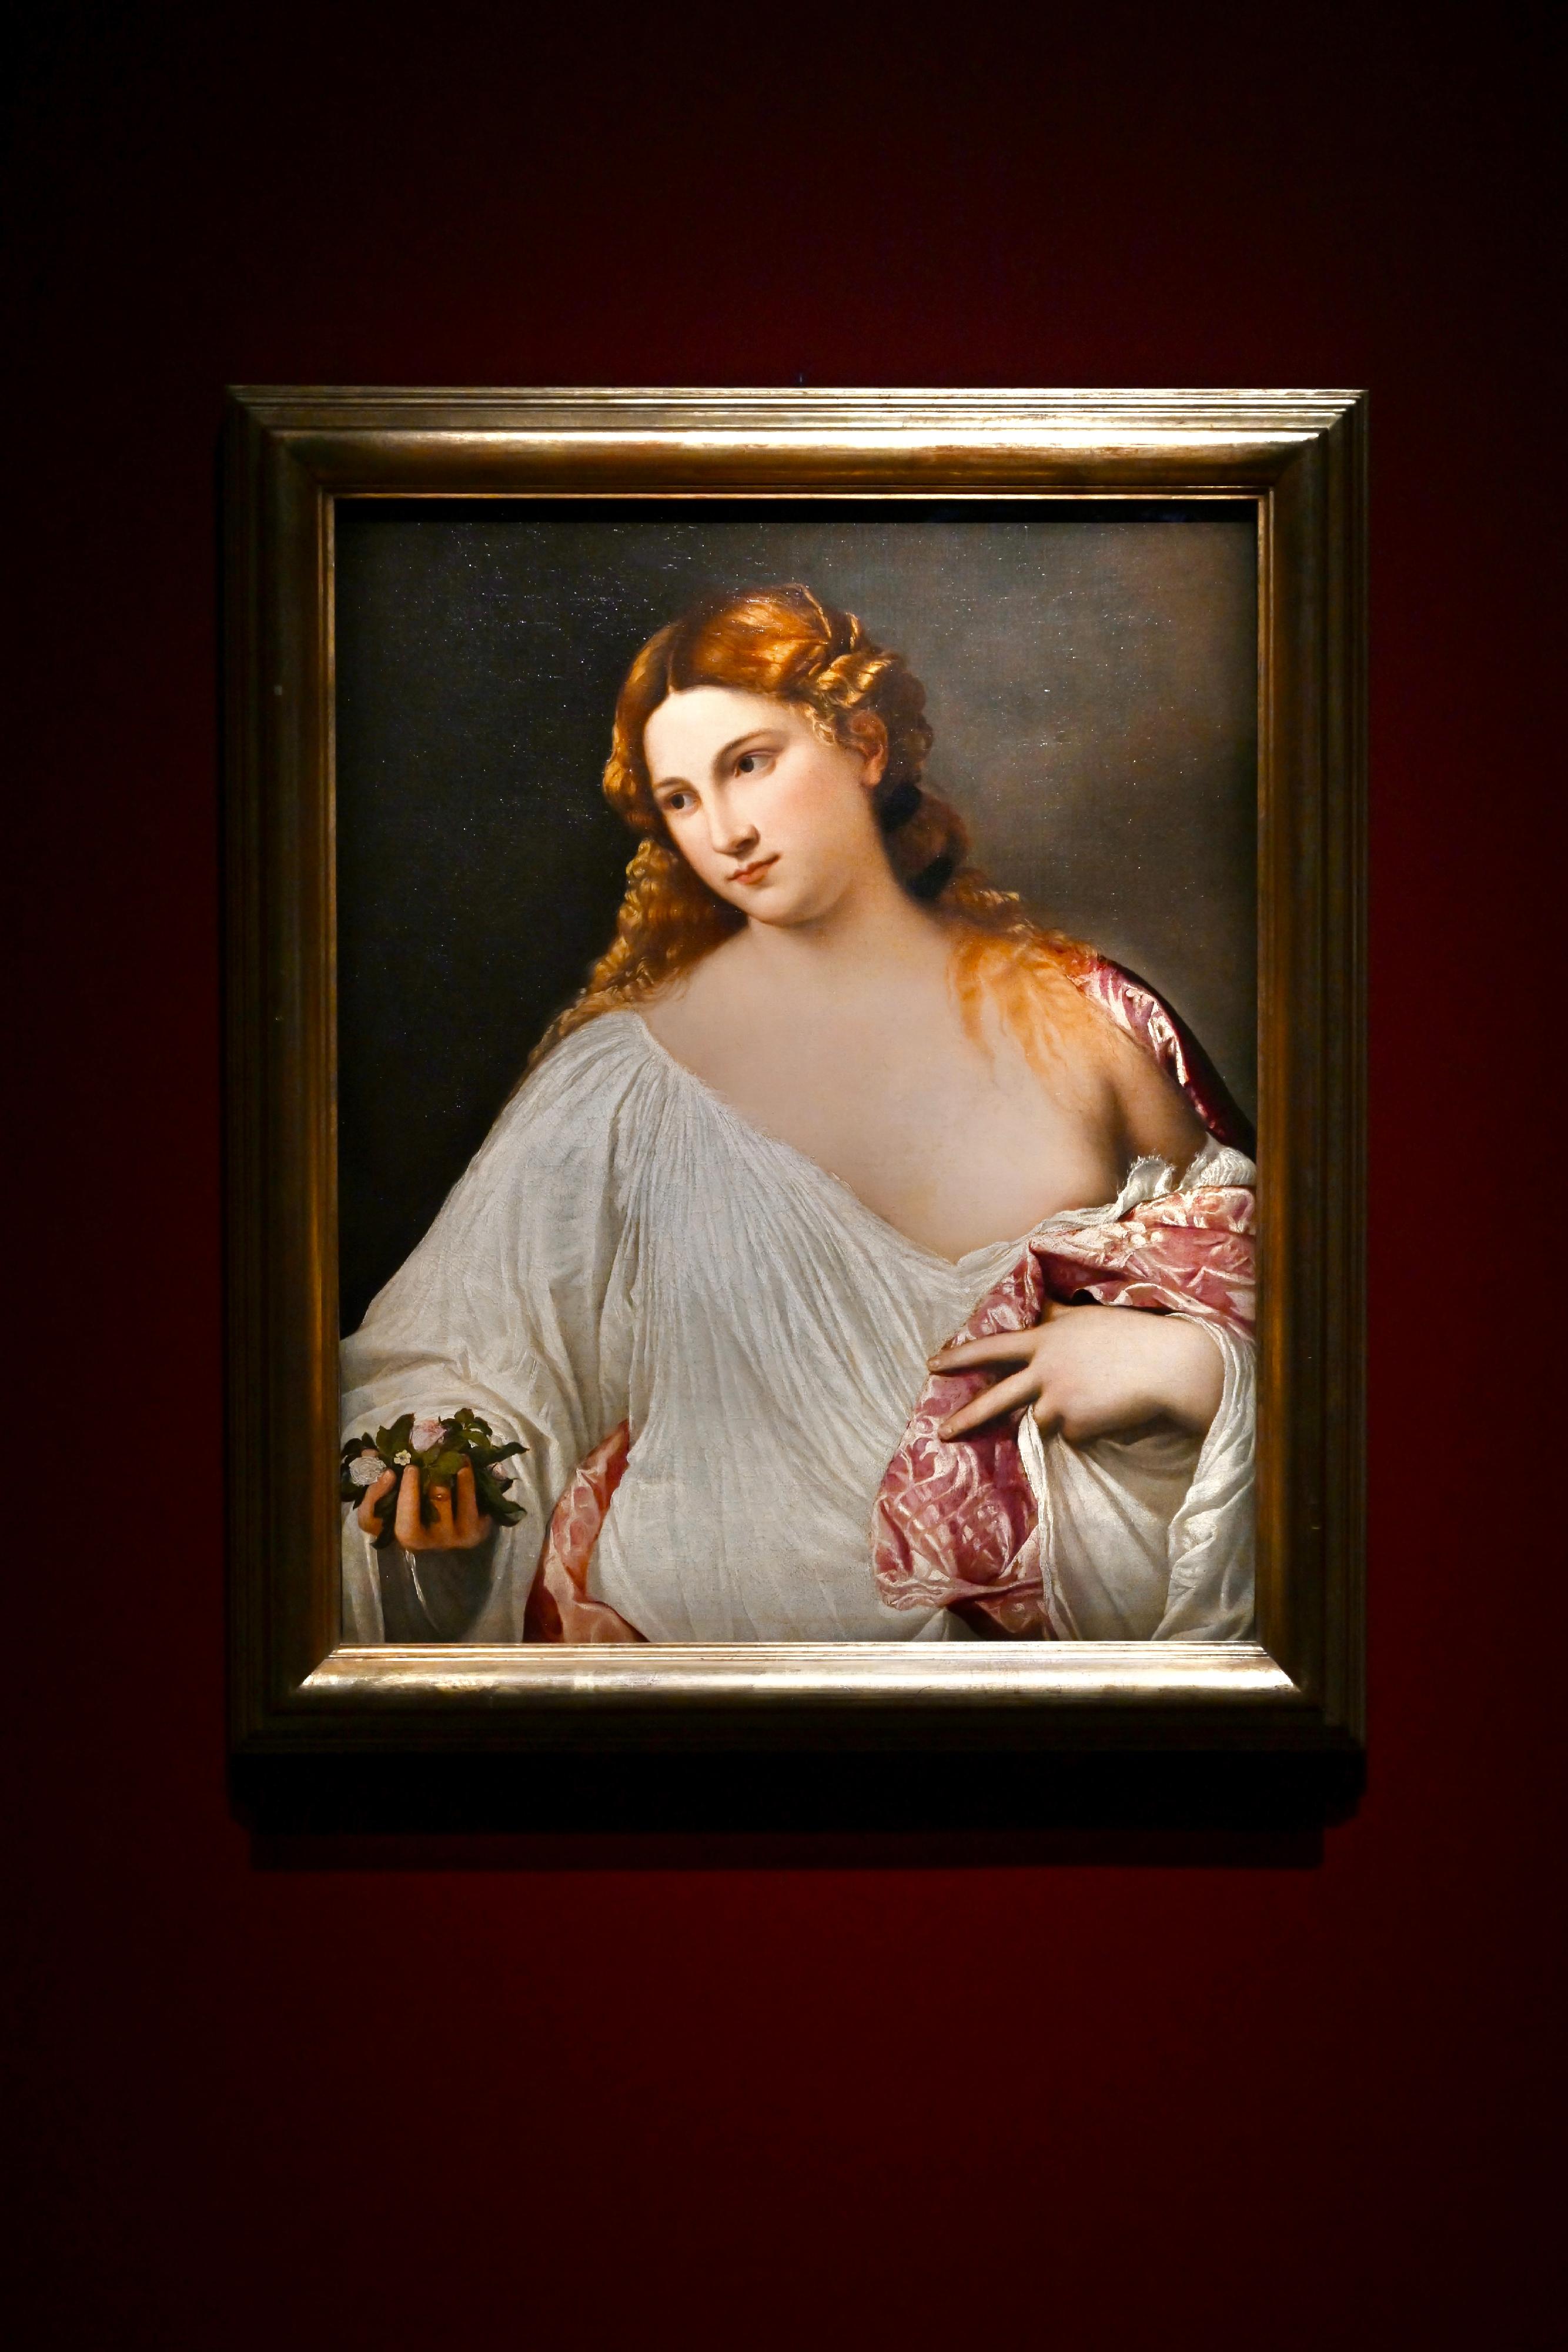 "The Hong Kong Jockey Club Series: Titian and the Venetian Renaissance from the Uffizi" exhibition opens to the public at the Hong Kong Museum of Art from today (November 3). Picture shows Titian's "Flora" which portrays an idealised female figure.